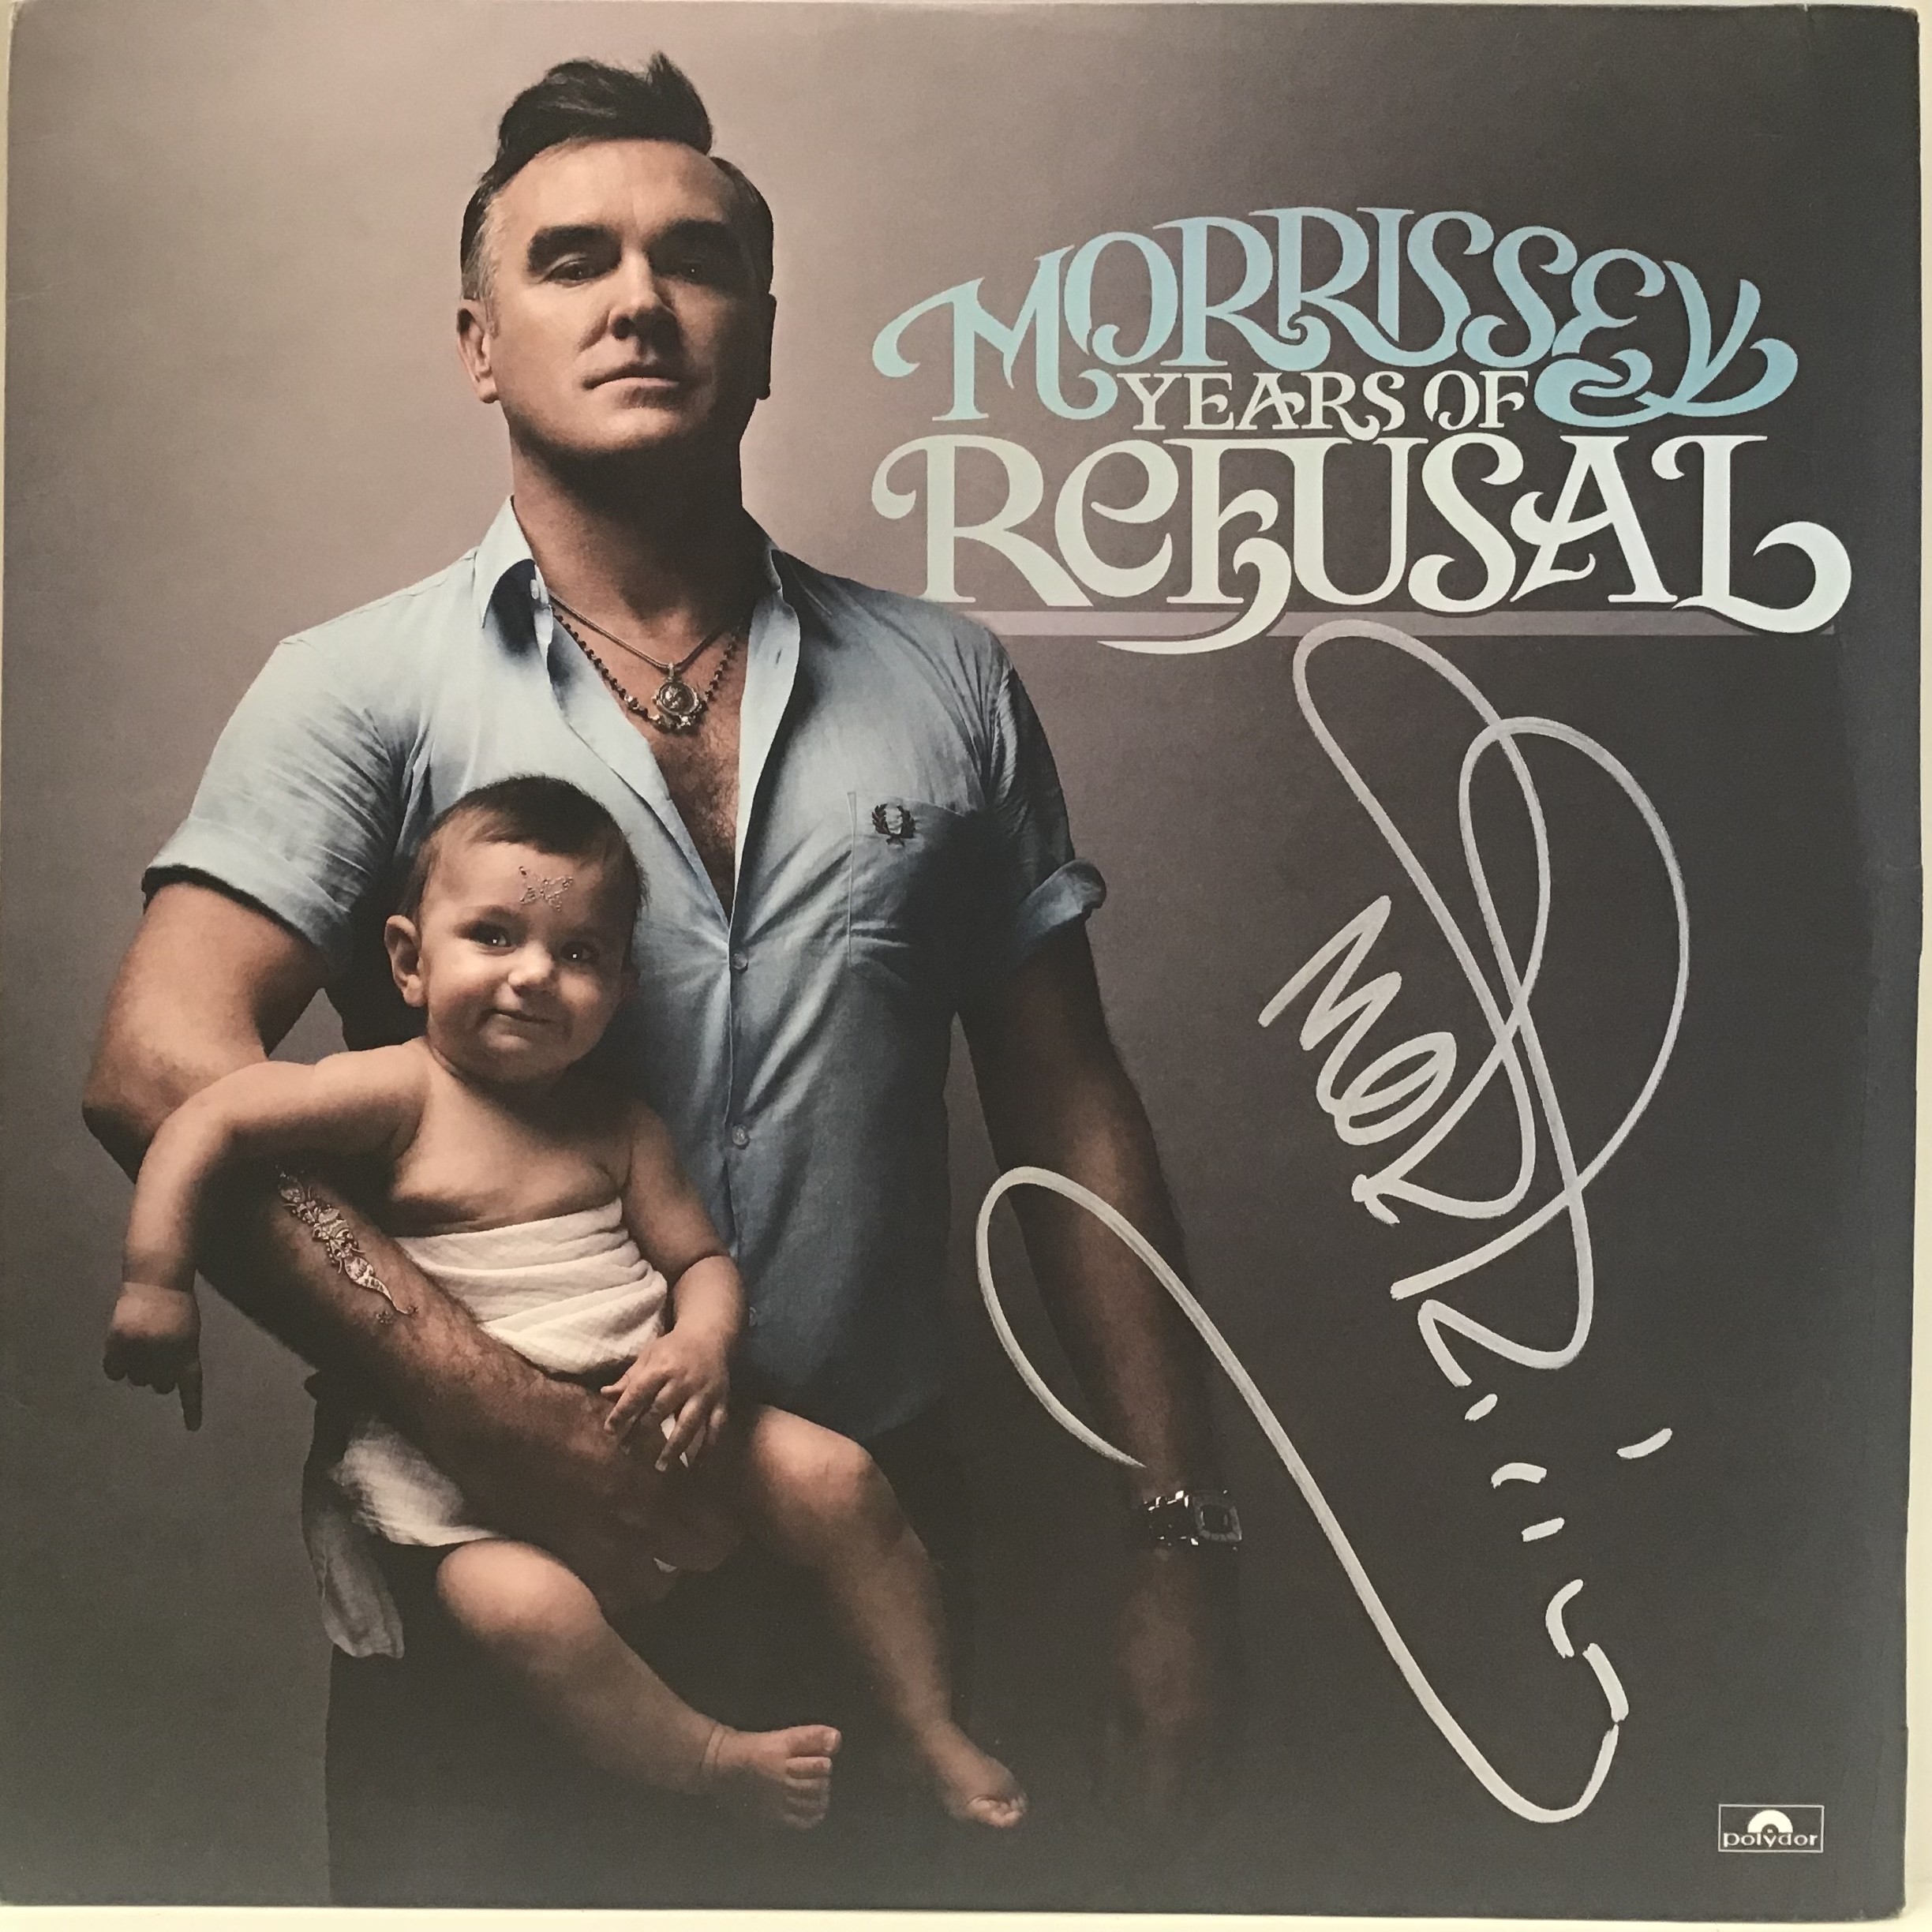 MORRISSEY SIGNED VINYL LP RECORD 'YEARS OF REFUSAL'. LP signed in 